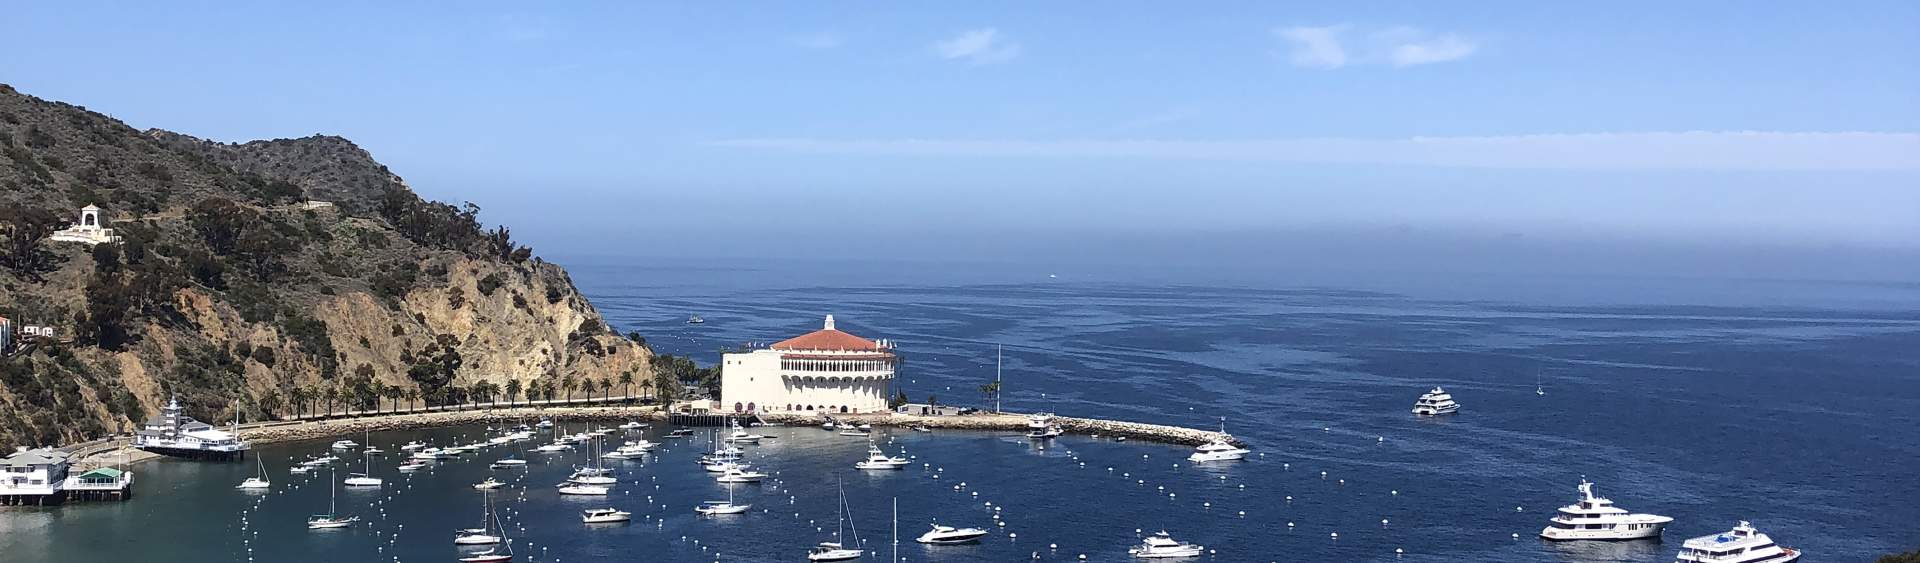 What's New on Catalina Island - Spring 2021